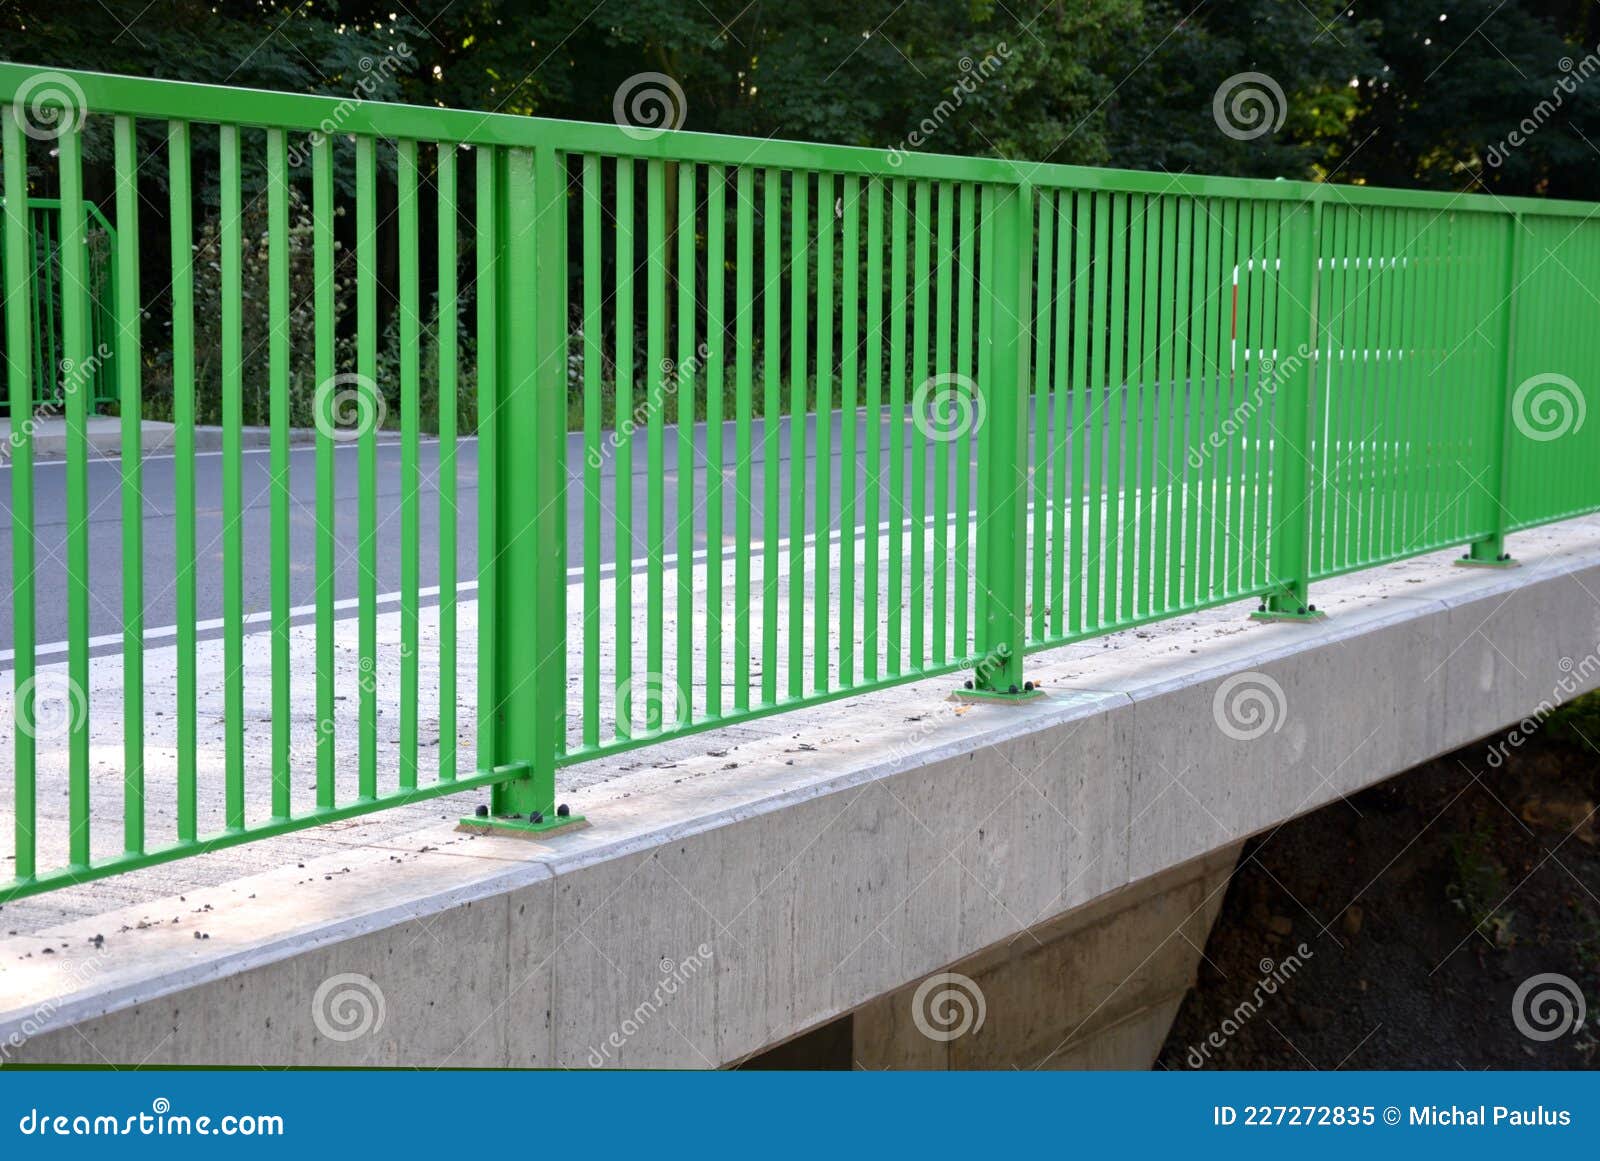 Path for Cyclists with an Asphalt Surface. Galvanized Iron Railing Over ...